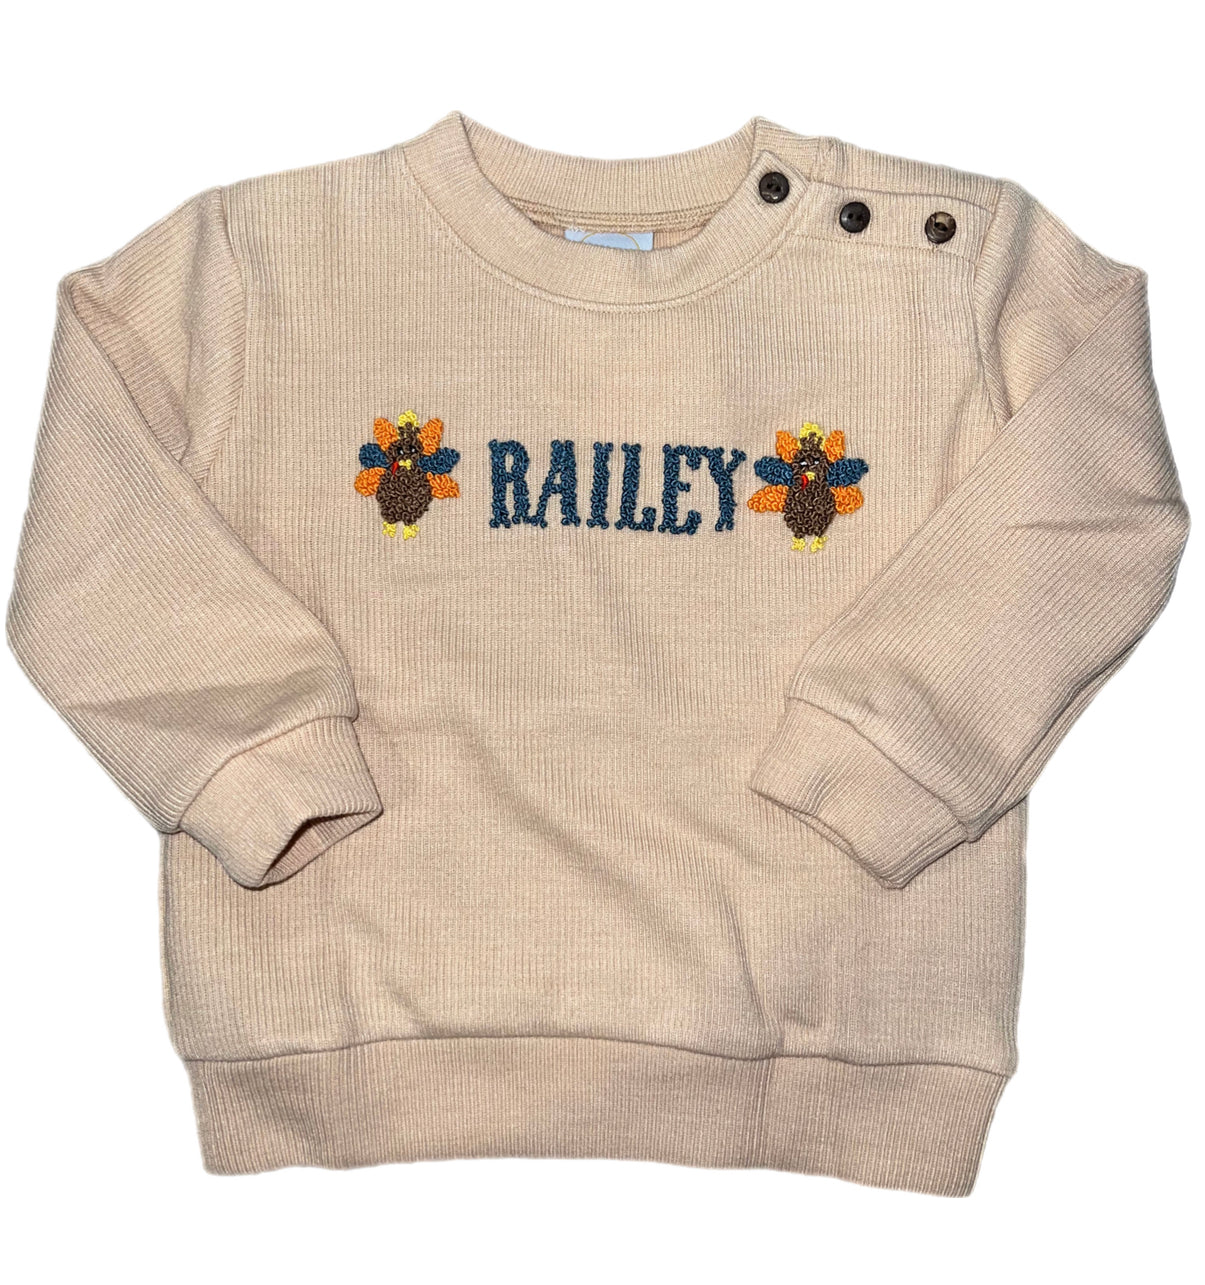 RTS: SBSC- Turkey Sweater Collection- Boys Sweater “Railey”